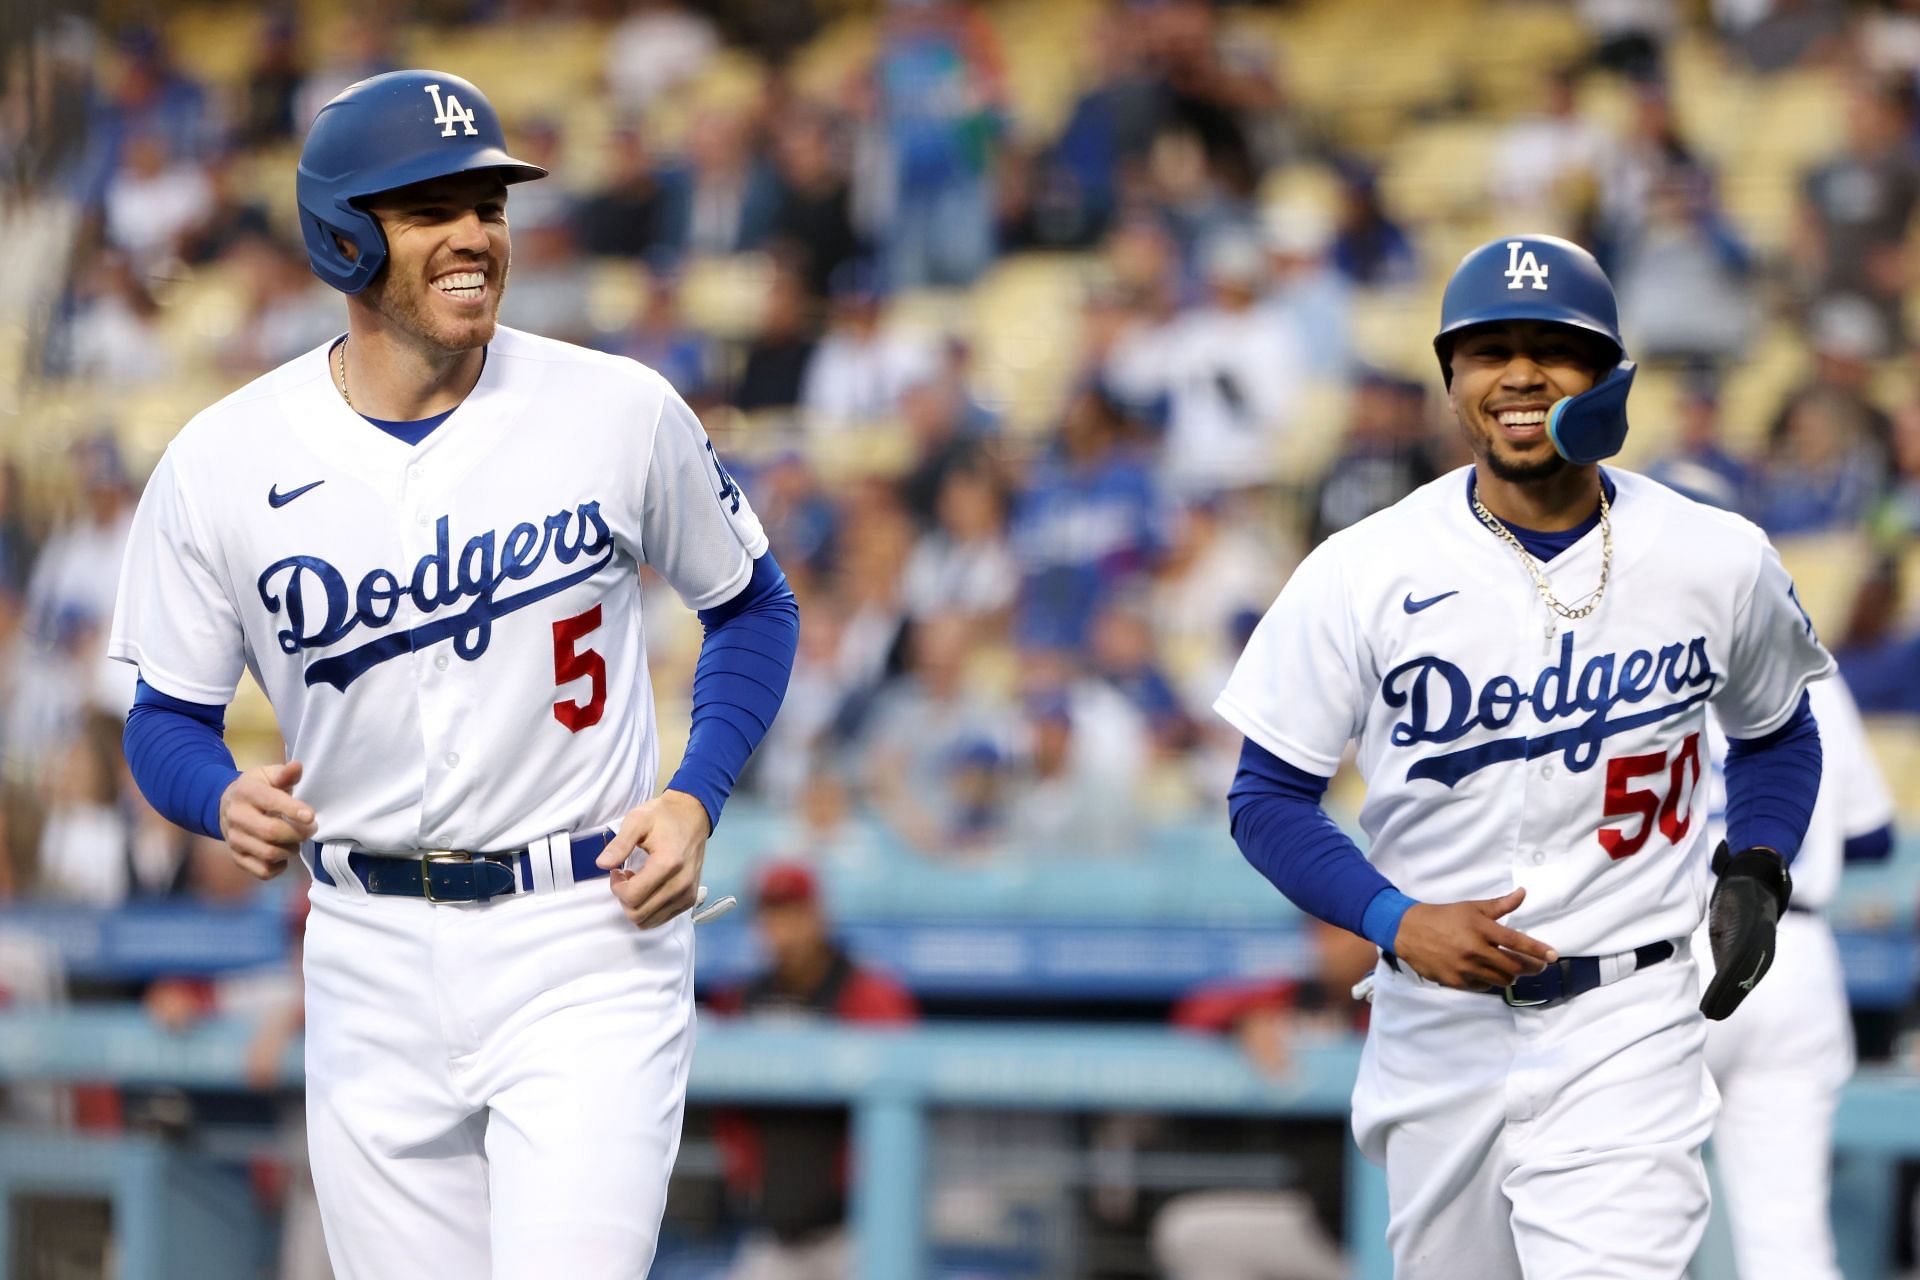 Freddie Freeman #5 and Mookie Betts #50 of the Los Angeles Dodgers react after scoring on a two-run single